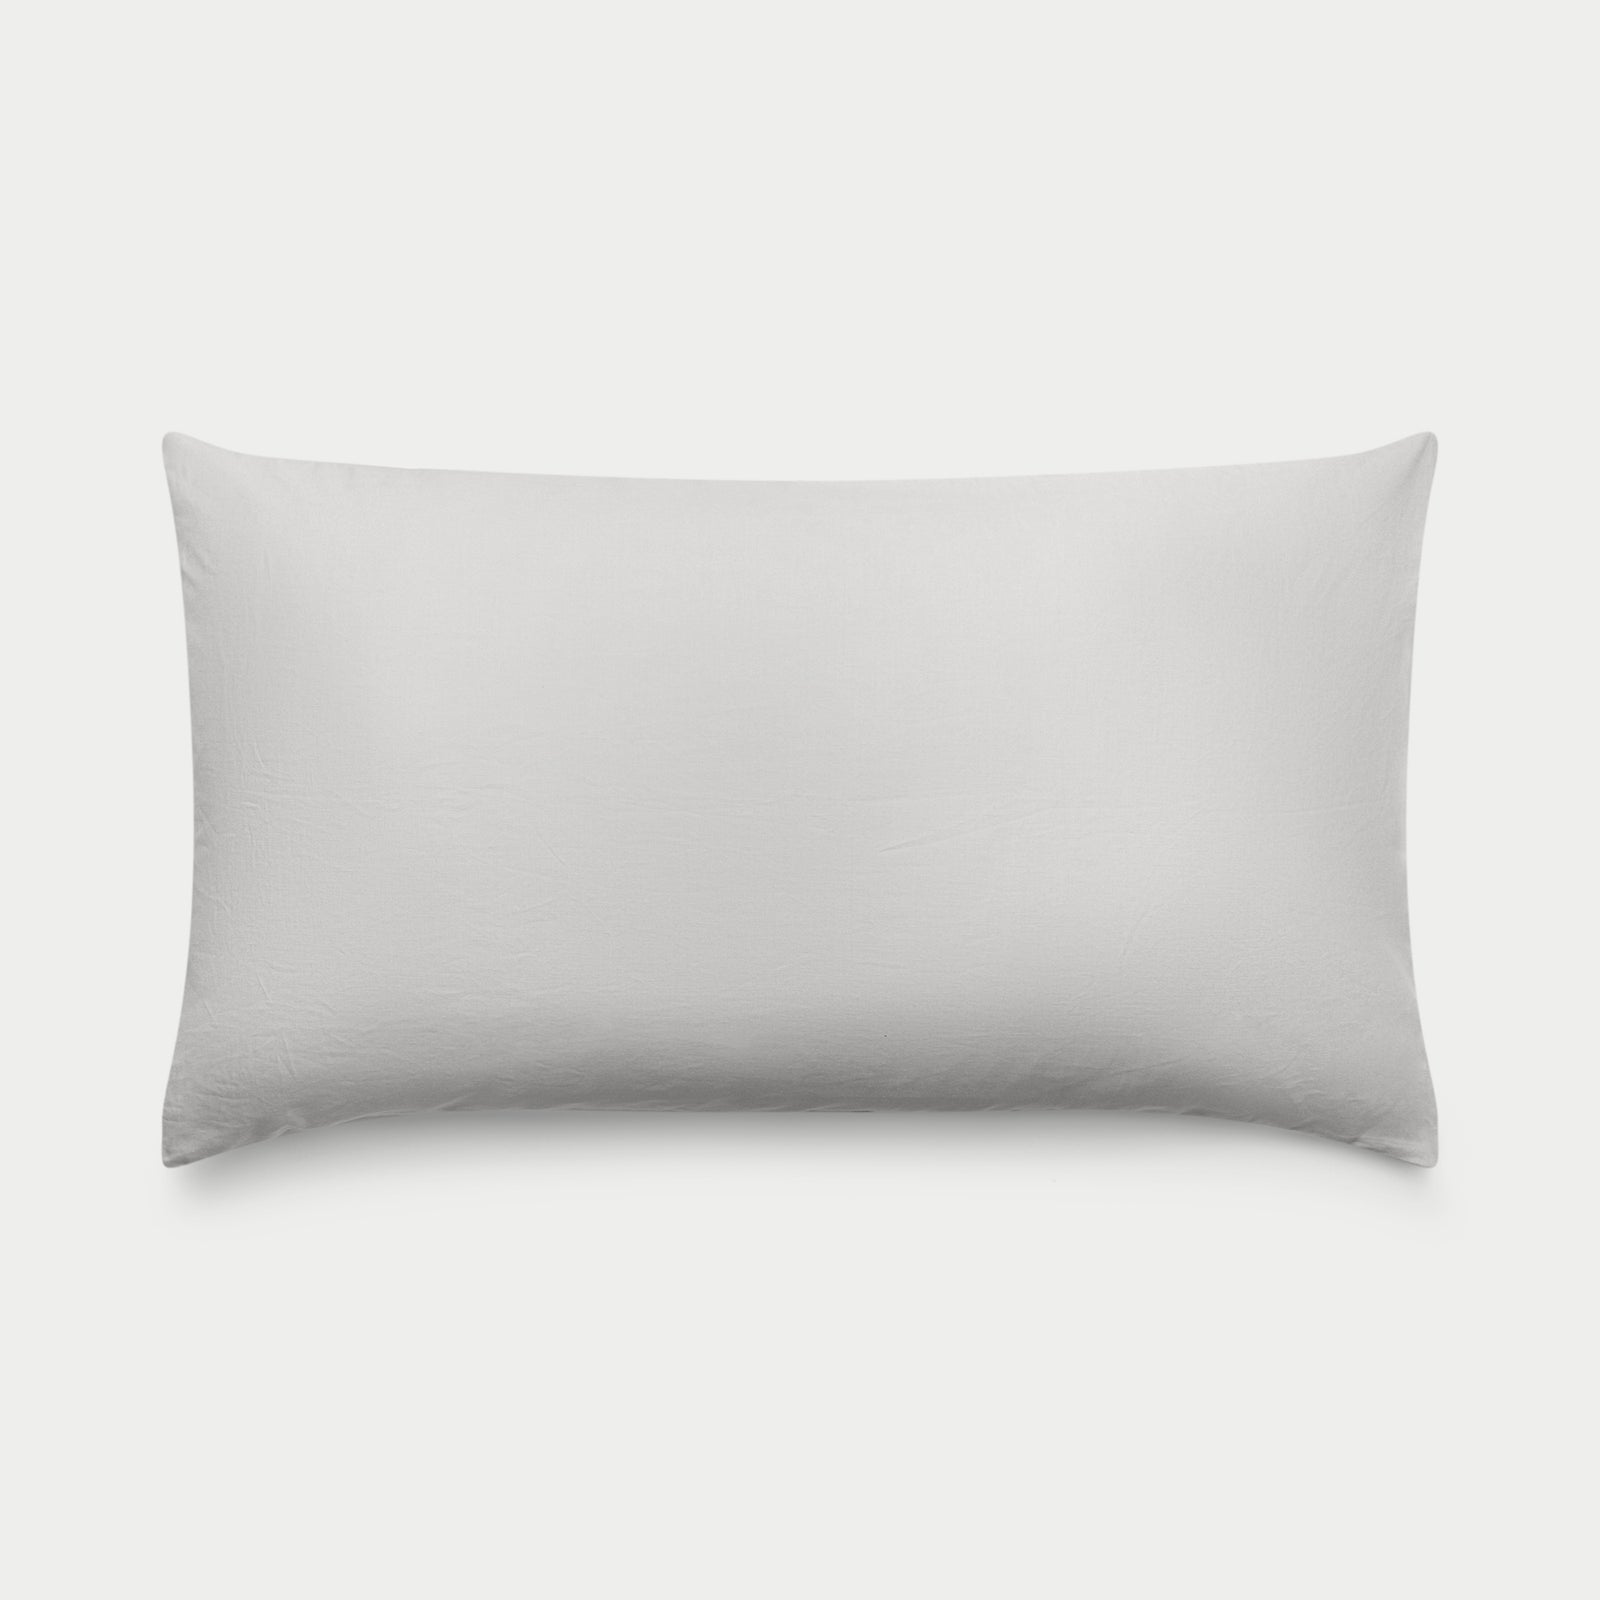 Light Grey Linen Bamboo Pillow Shams photographed over a white background. 